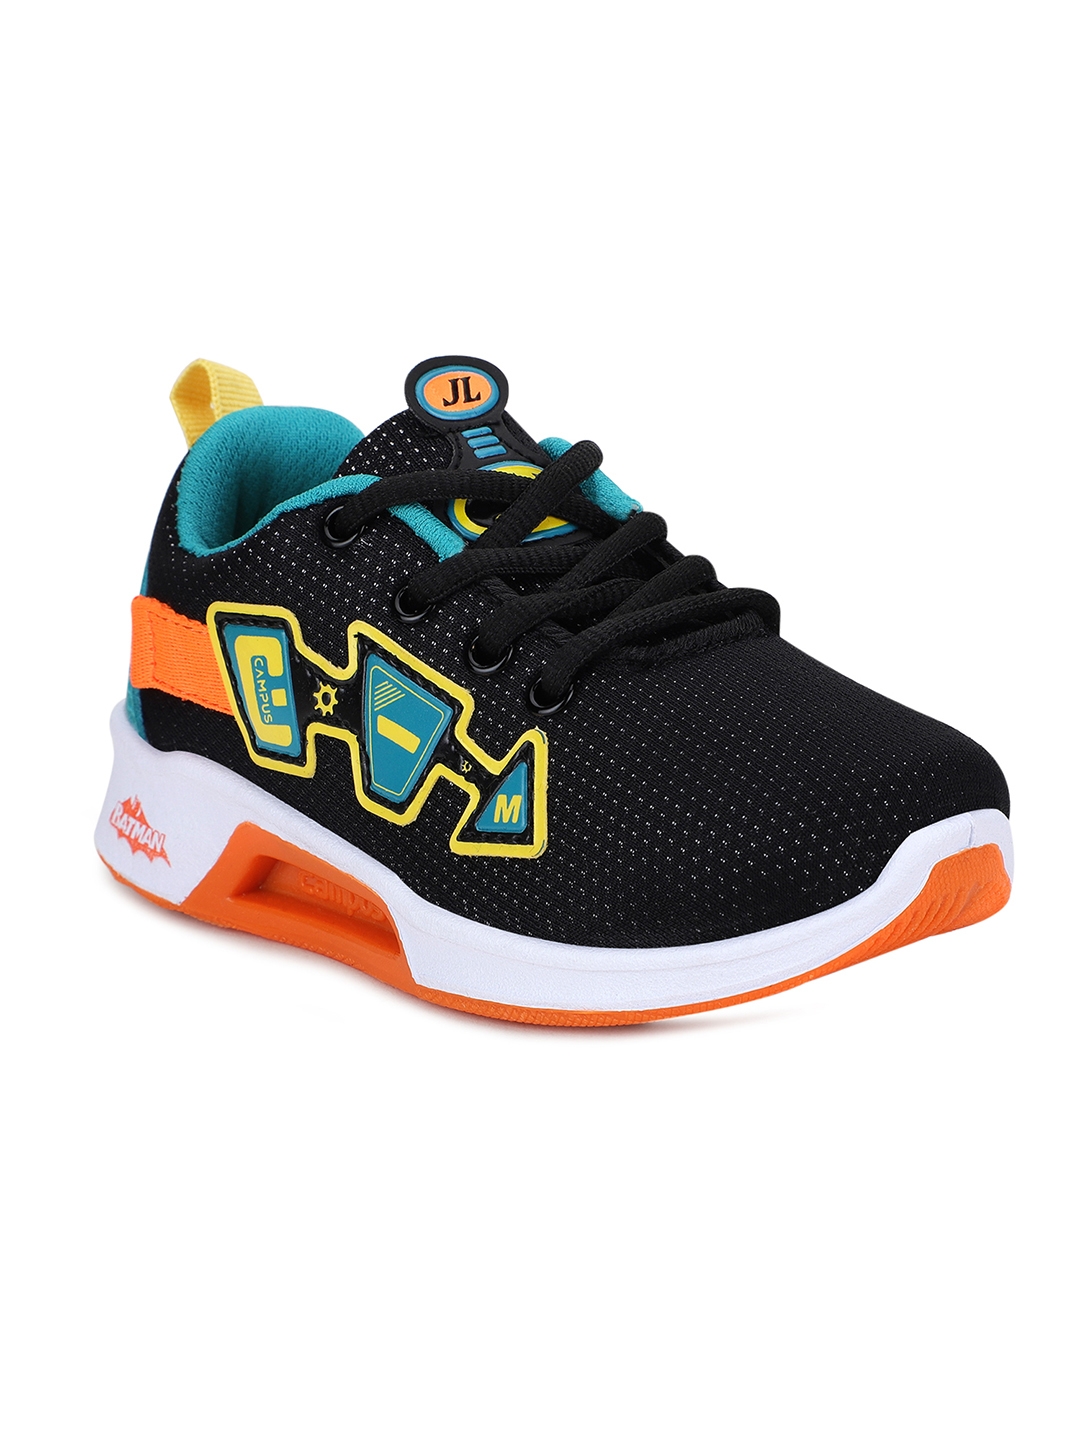 Campus Shoes | Black Hm-506 Running Shoes